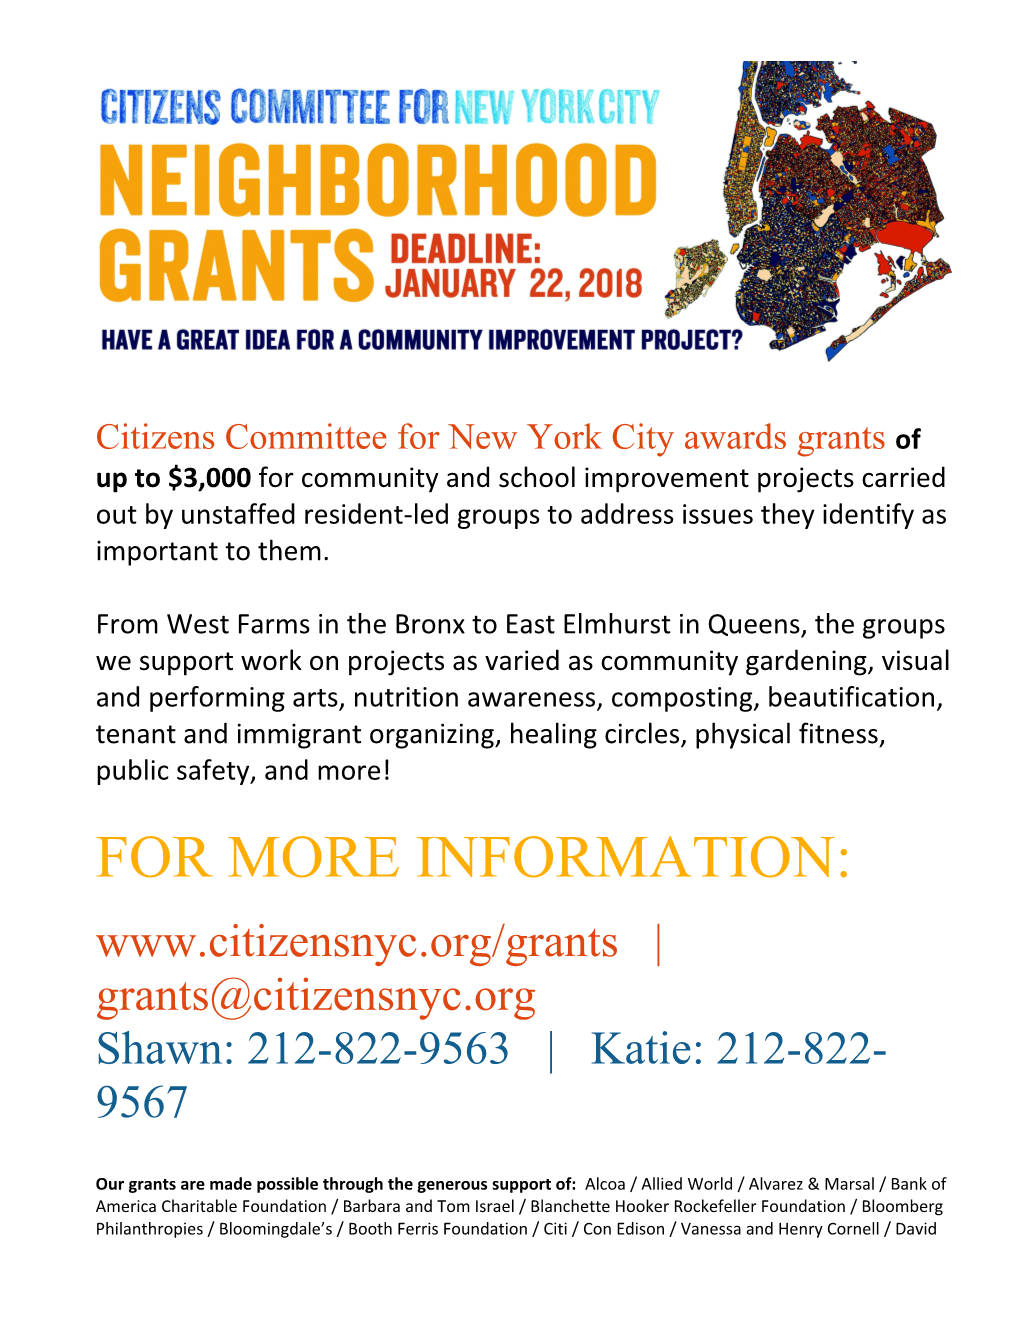 Citizens Committee for New York City Awards Grantsof up to $3,000For Community and School